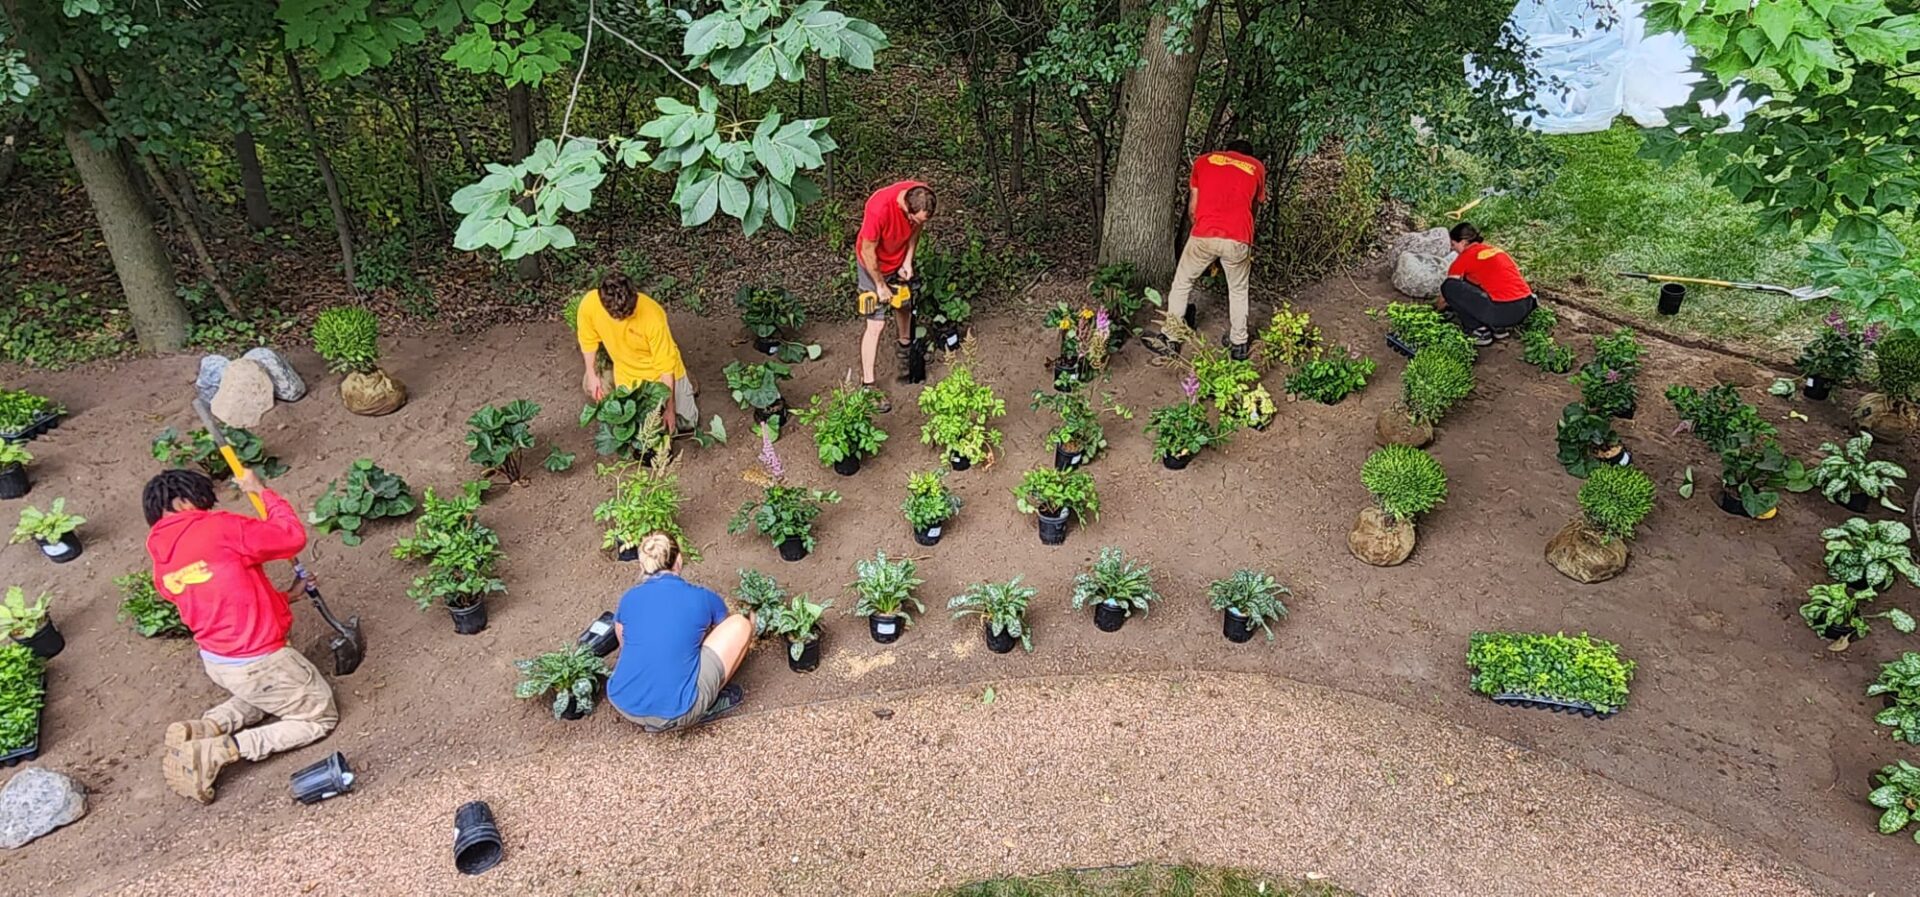 Several people are gardening, planting various plants in a curved soil bed bordered by gravel paths, surrounded by trees and greenery.